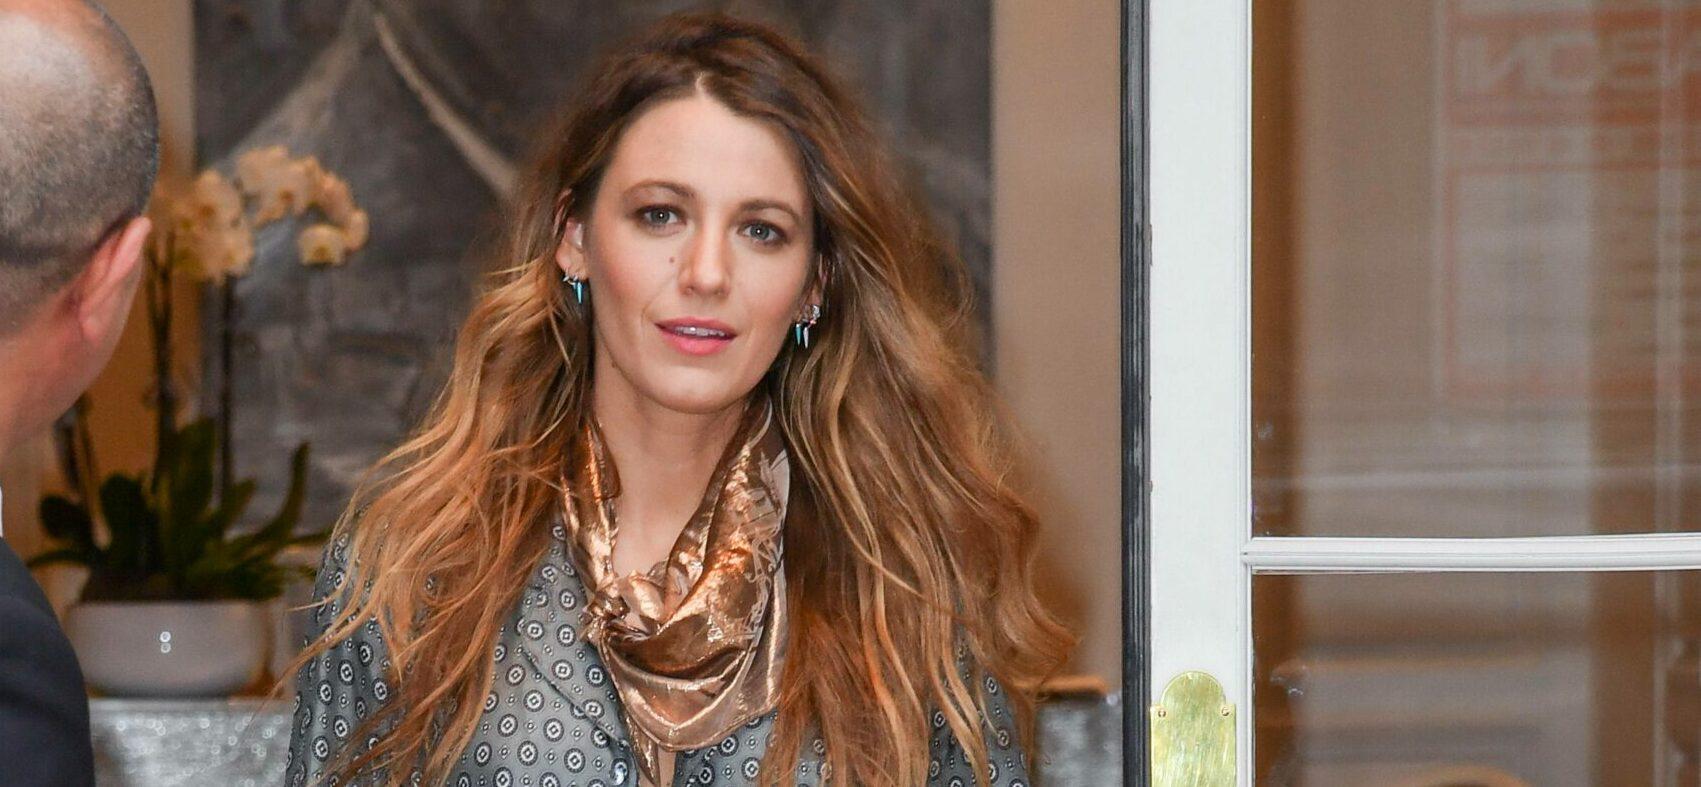 Blake Lively leaves the Dior office in Paris